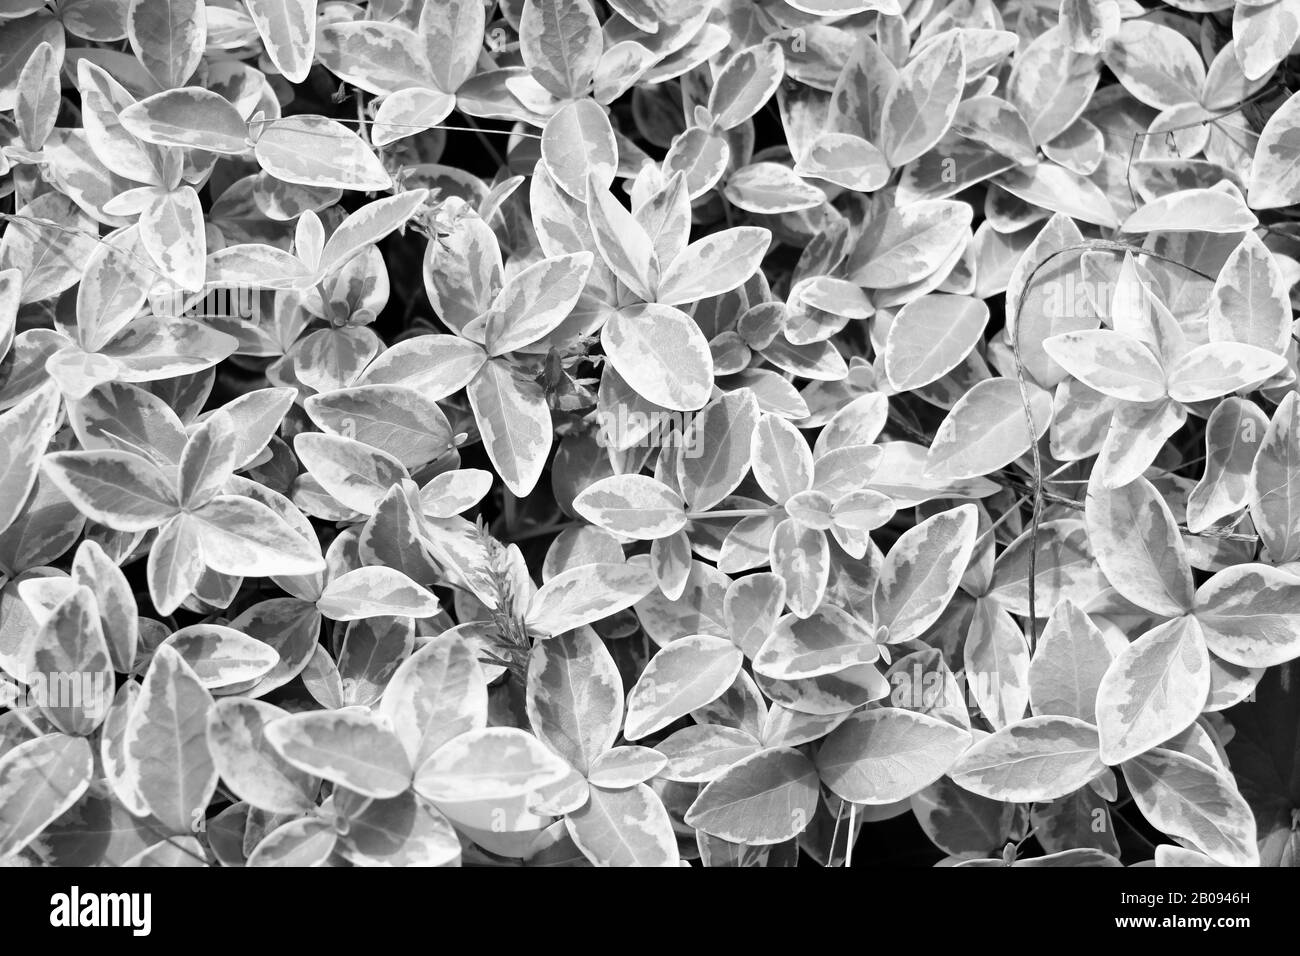 Young green leaves of flowers or plants, black and white photo, background, texture Stock Photo